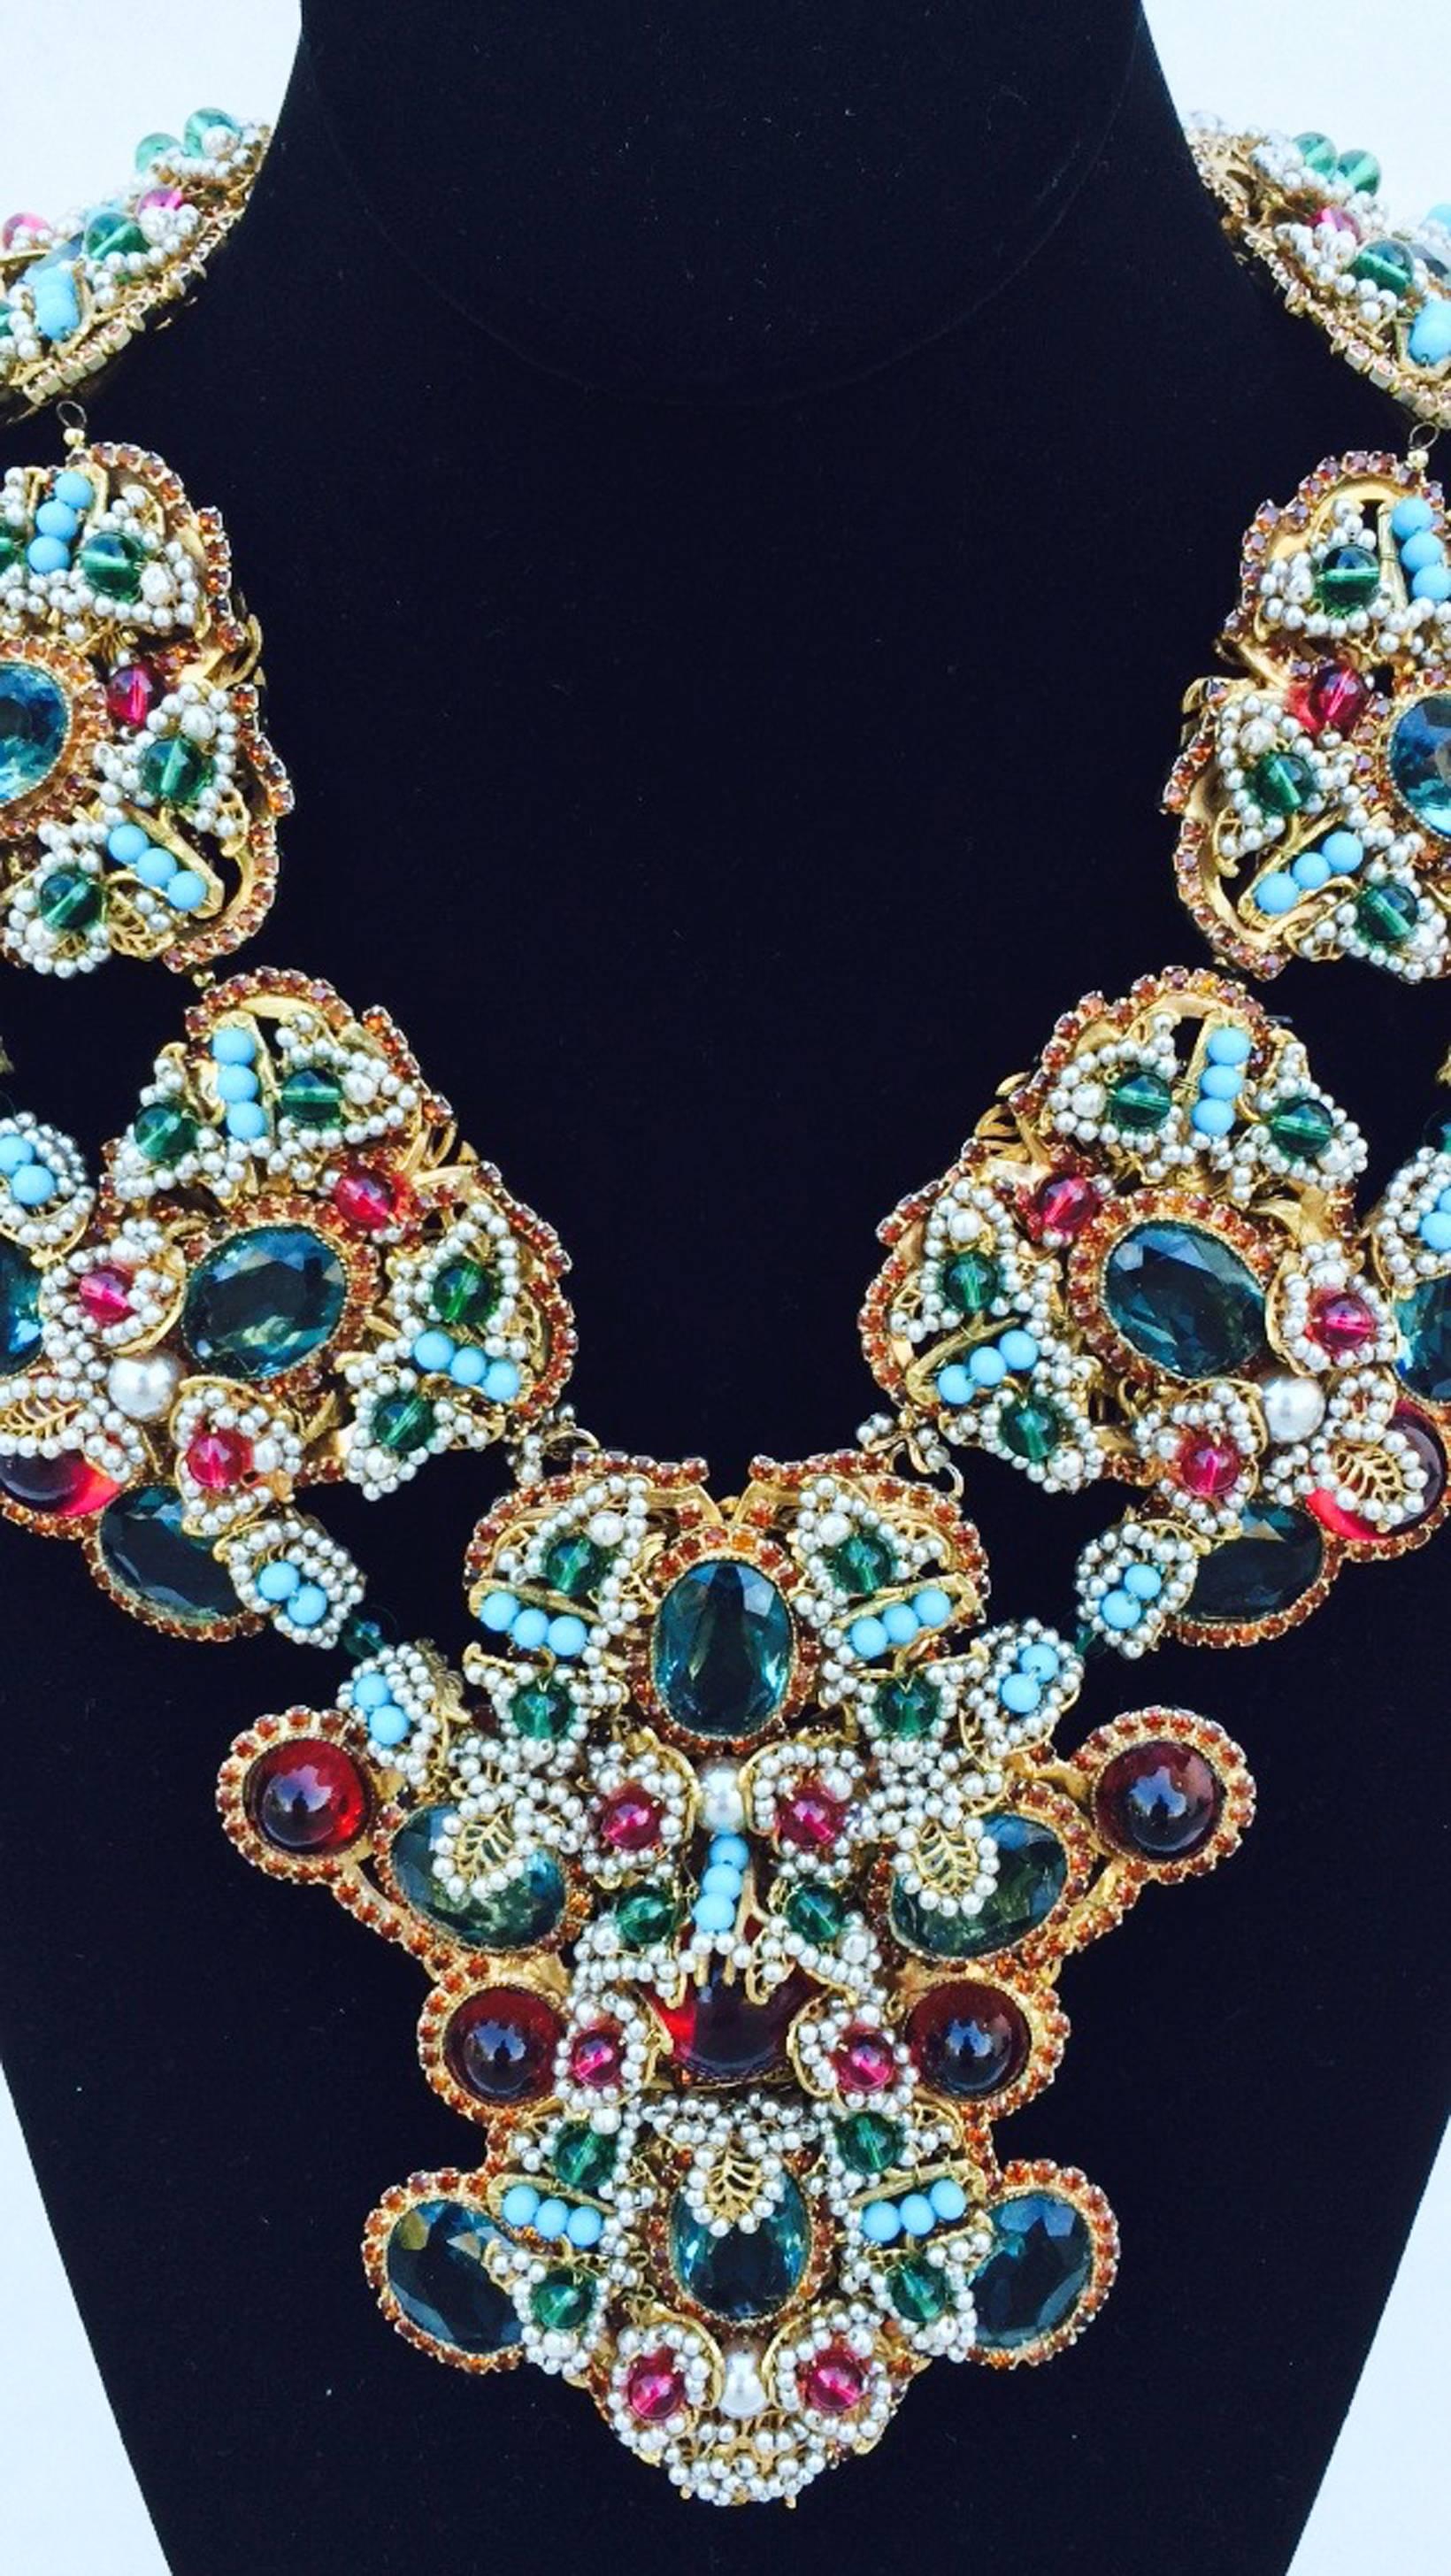 A incredible one-off William de Lillo maharani mughal style bib necklace. Signed gilt metal item features glass, metal and crystal stones/elements (layer upon layer including green, ruby, turquoise,red, faux pearl etc.). Rare one-off hand